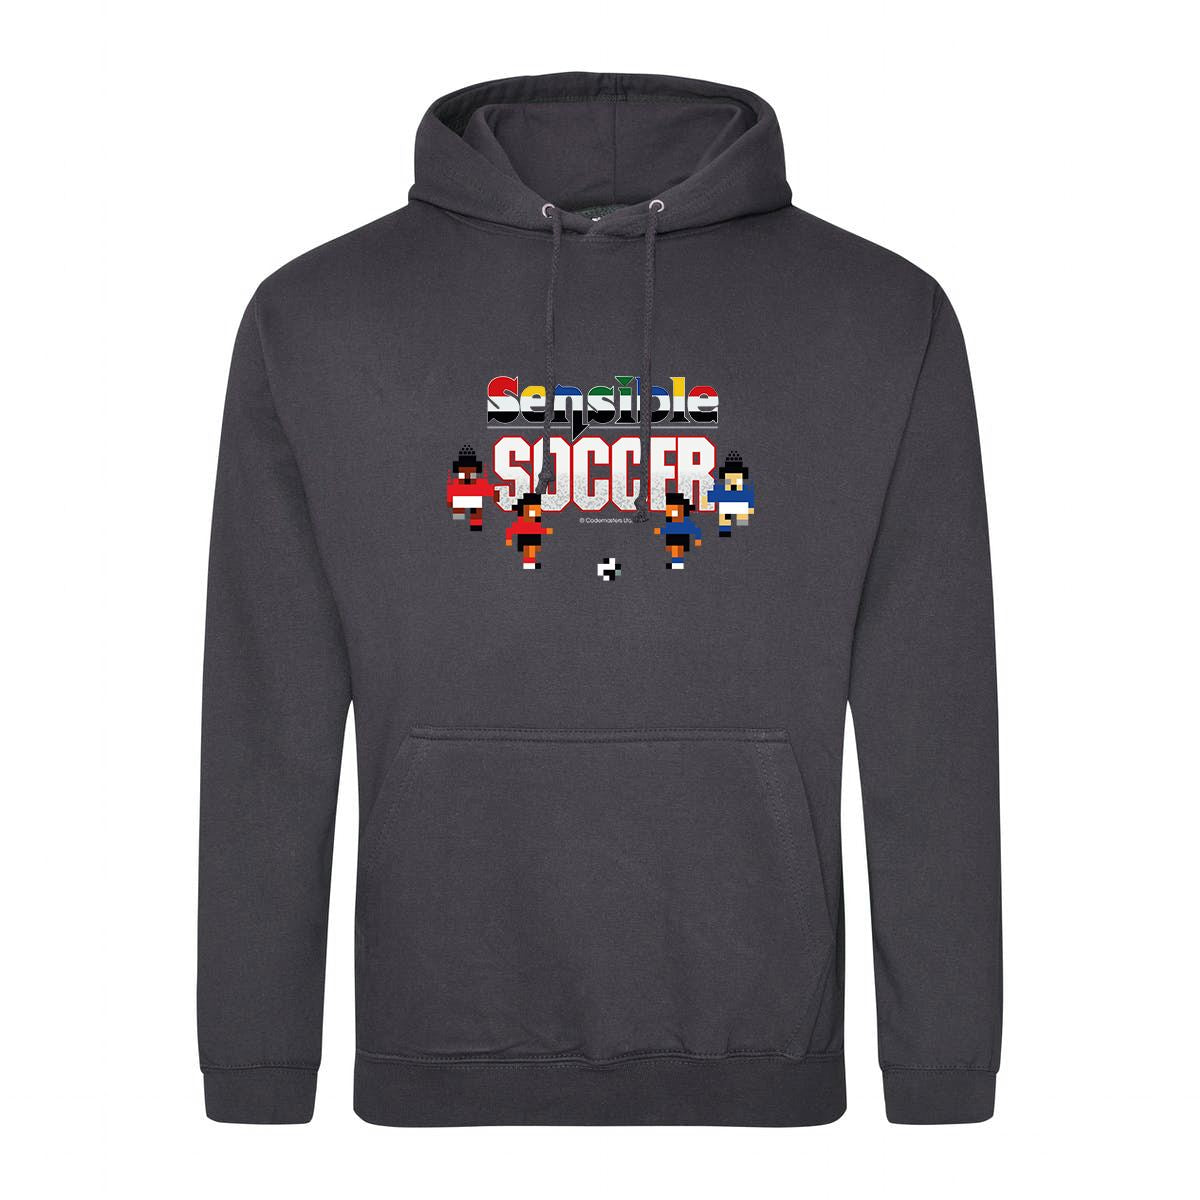 Sensible Soccer Retro Gaming Hoodie Hoodie Seven Squared Small 36" Chest Storm Grey 